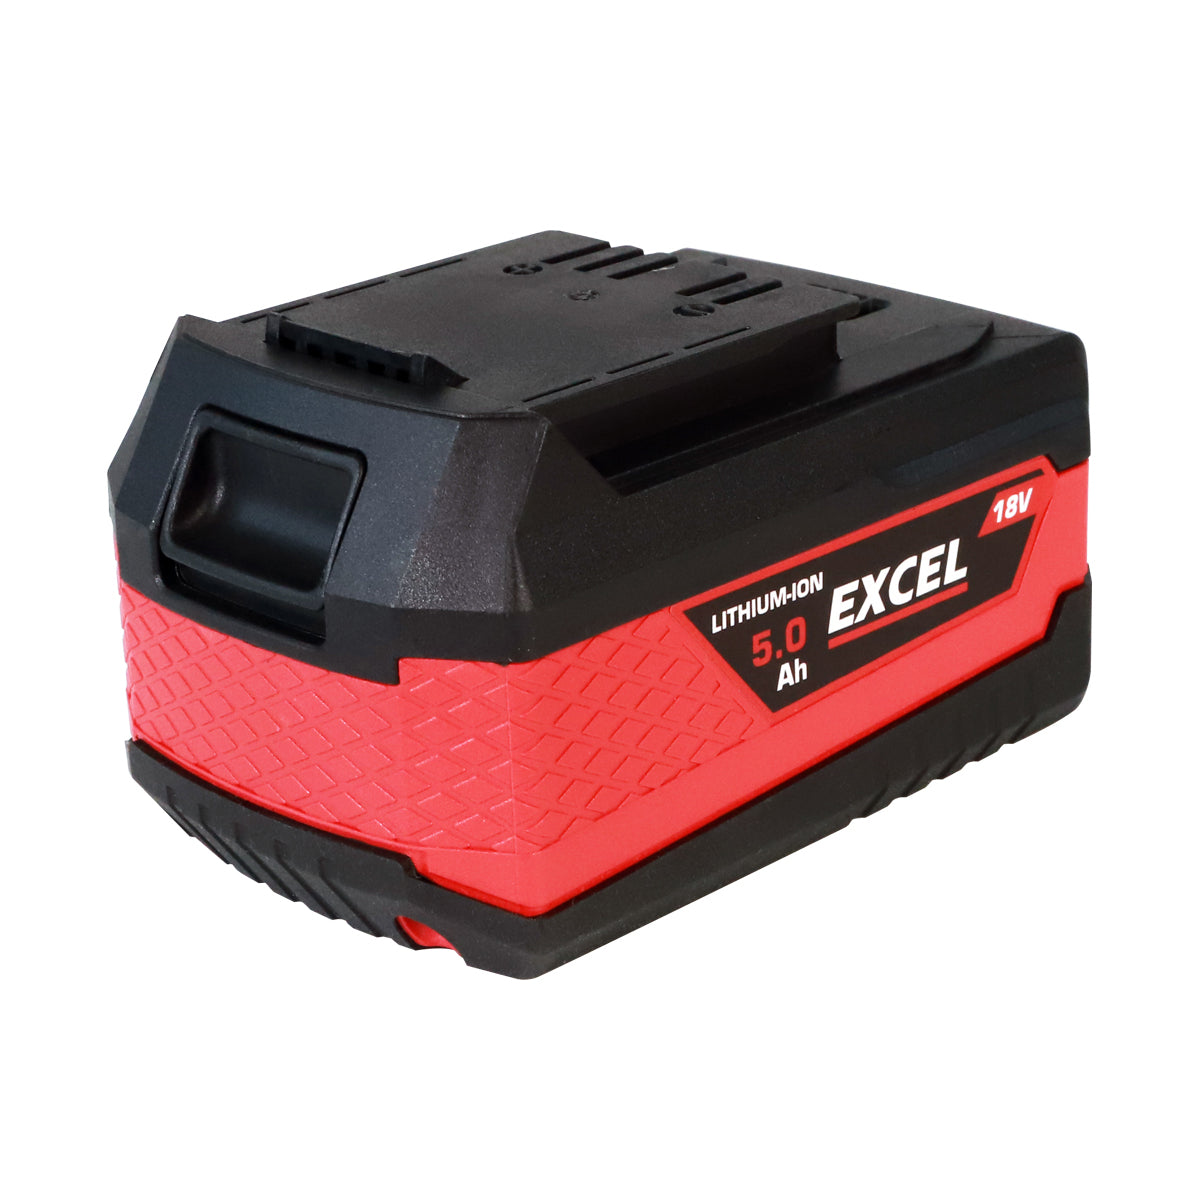 Excel 18V 3 Piece Garden Power Tools with 3 x 5.0Ah Battery & Charger EXL14999